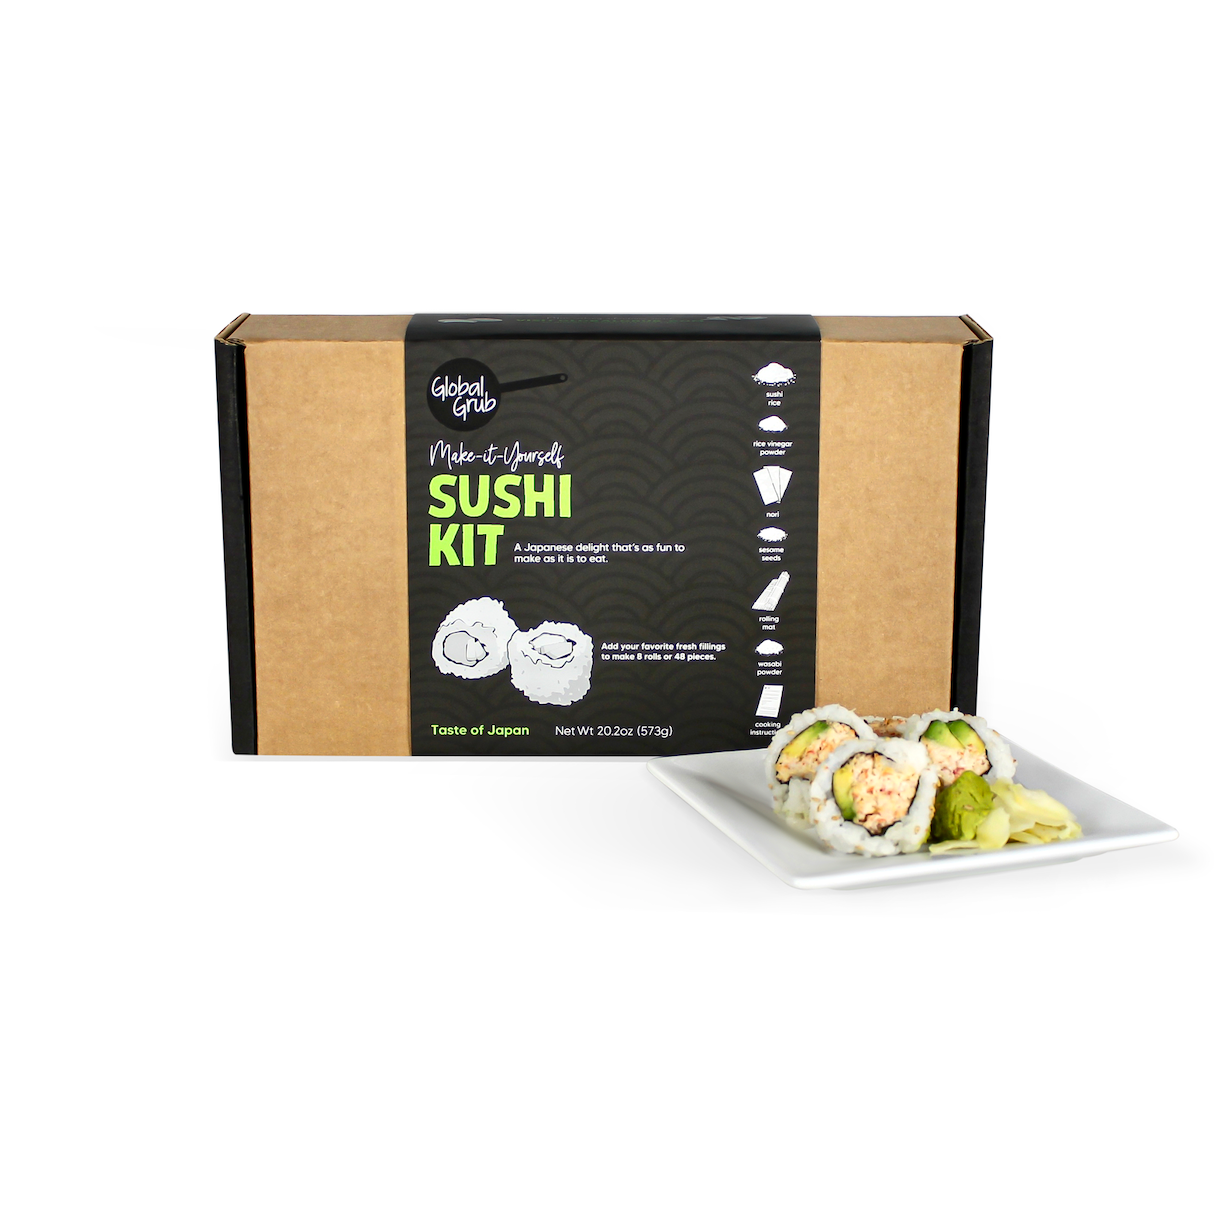 DIY Sushi Roll Making Kit Gift for Kids Interested in Culinary Arts • A  Family Lifestyle & Food Blog